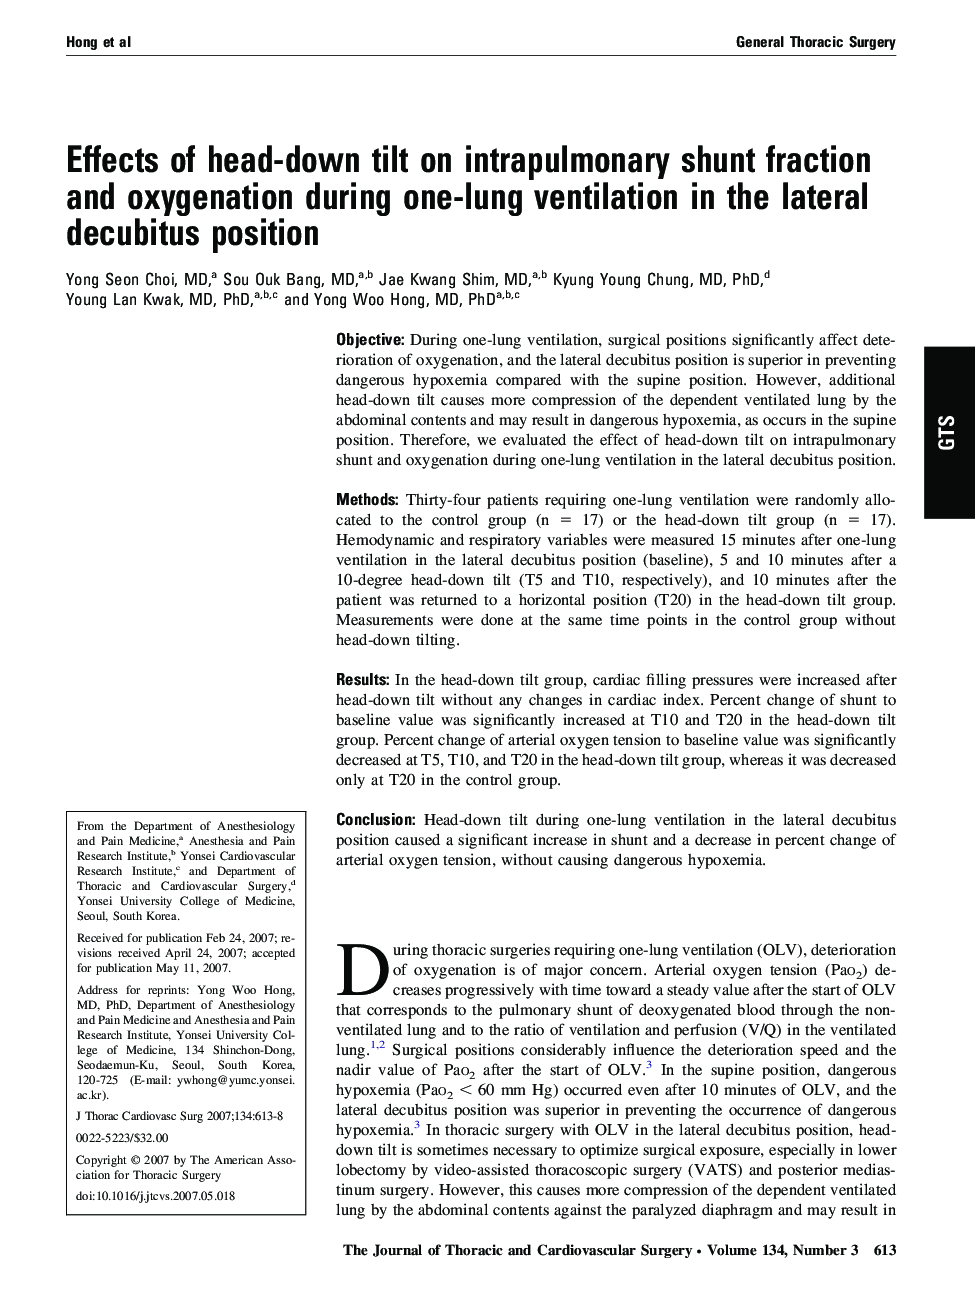 Effects of head-down tilt on intrapulmonary shunt fraction and oxygenation during one-lung ventilation in the lateral decubitus position